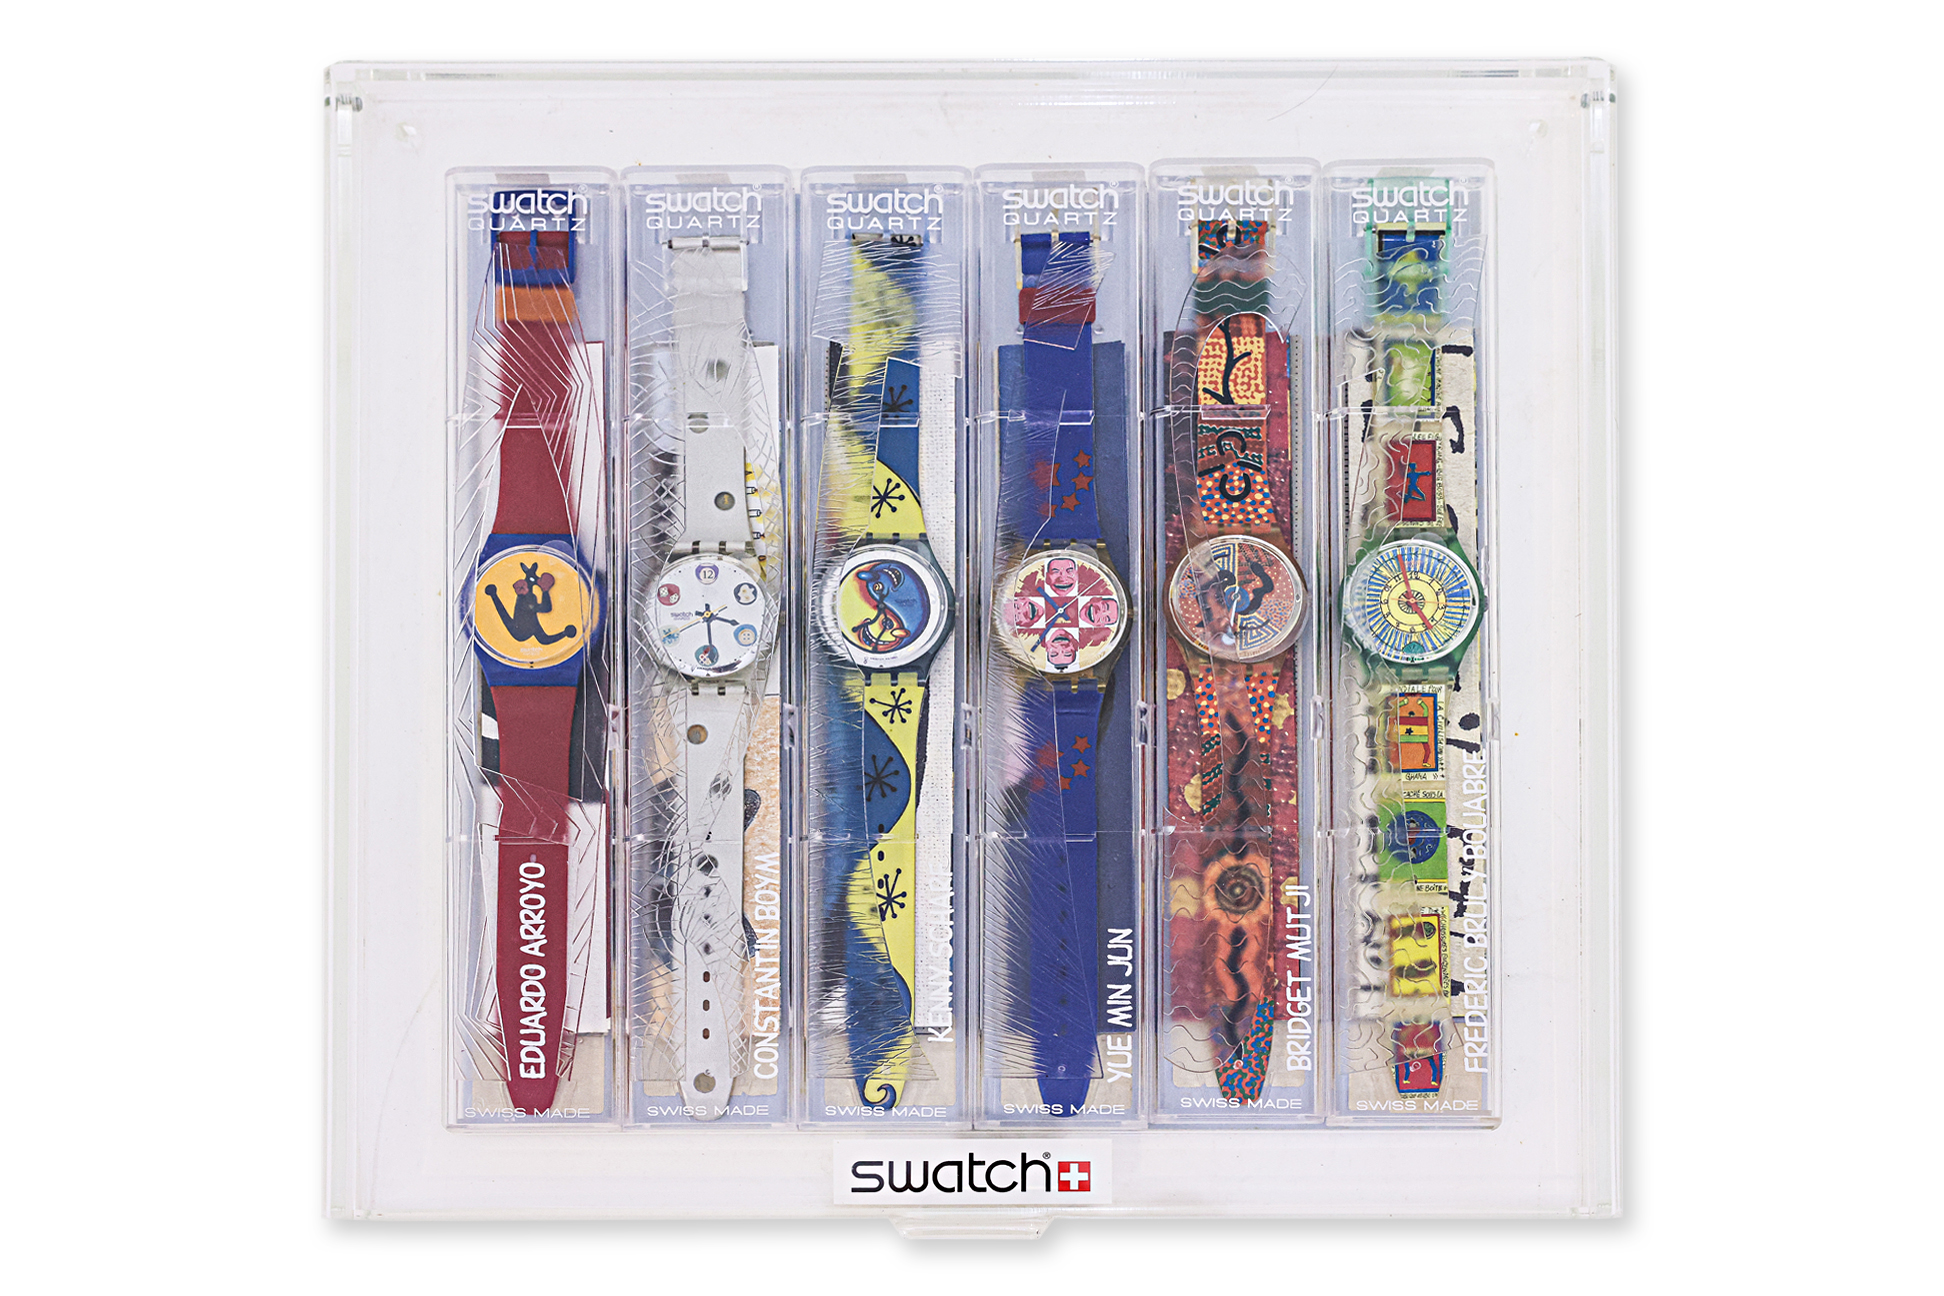 A SWATCH ARTISTS SERIES 1996 FULL SET OF SIX WRISTWATCHES